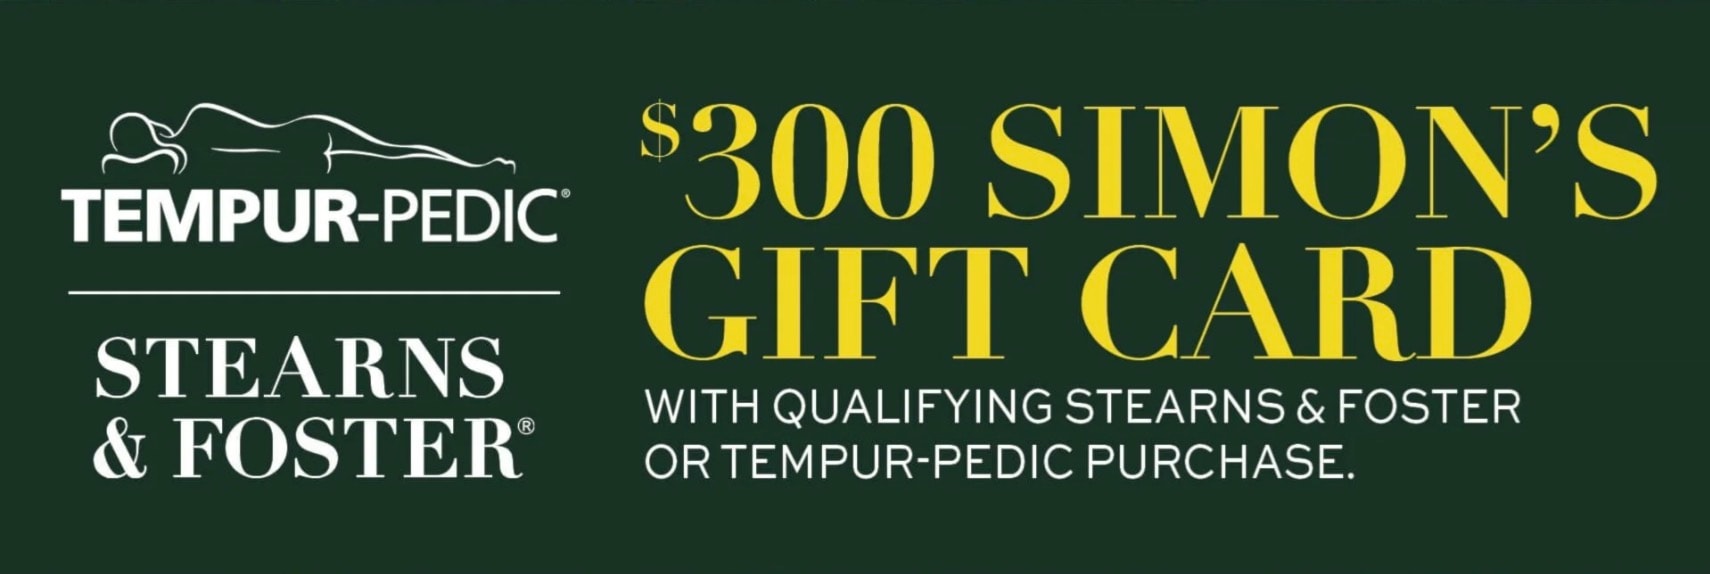 Receive a $300 Simon's Gift Card with the purchase of a tempurpedic or stearns and foster mattress.